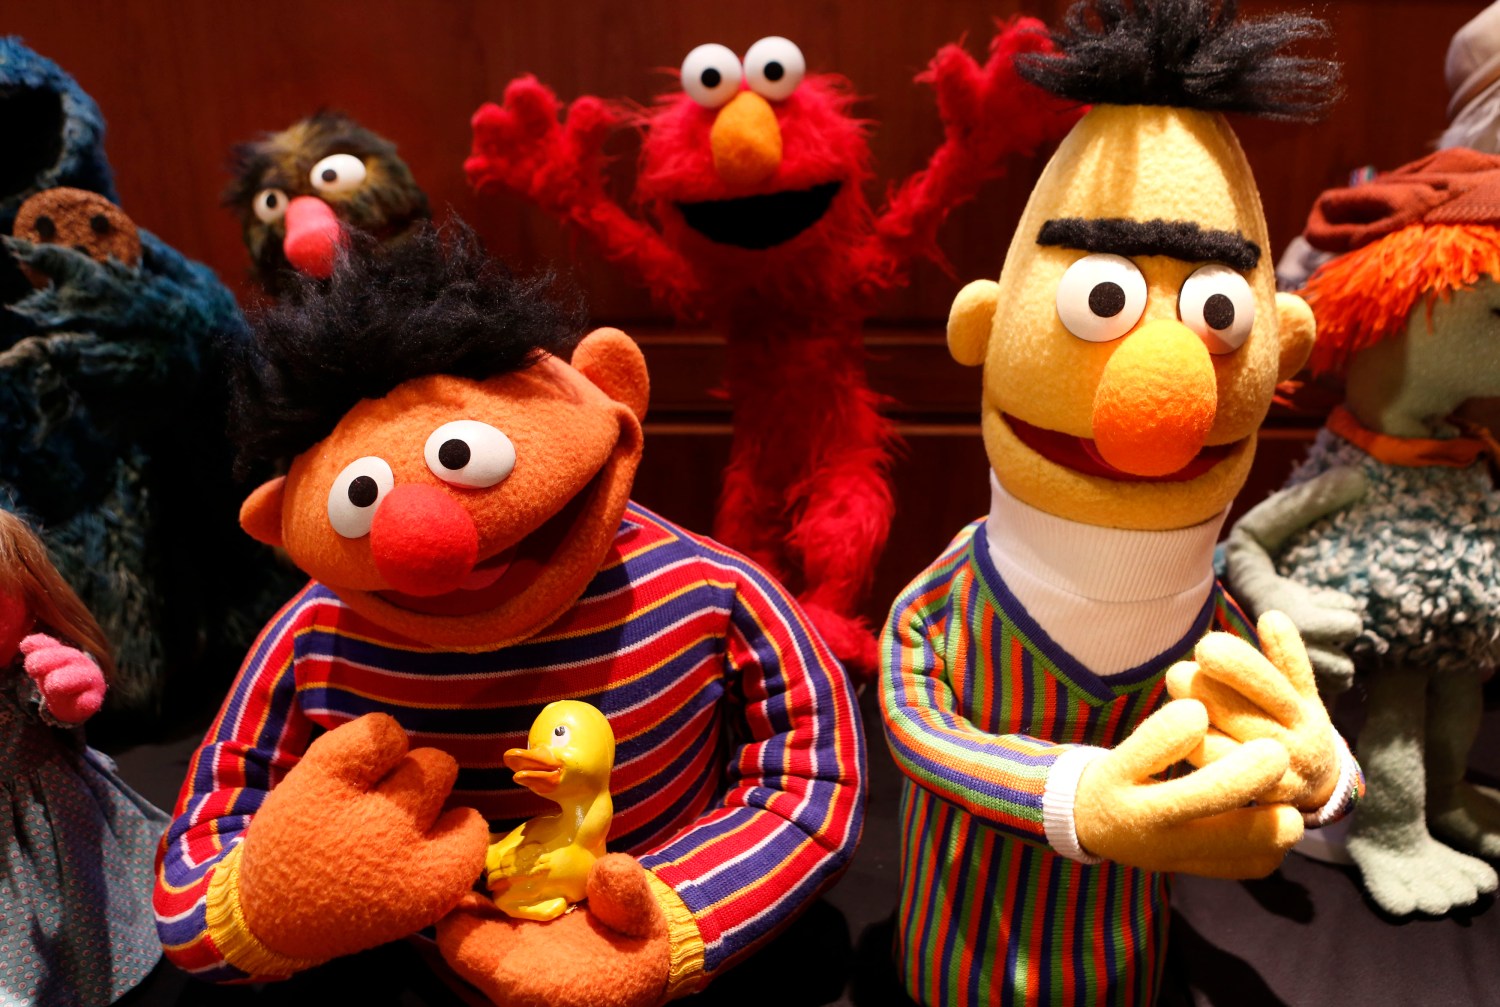 Puppets Ernie (L) and Bert from Sesame Street are seen after they were donated to the National Museum of American History to the Smithsonian's National Museum of American History.